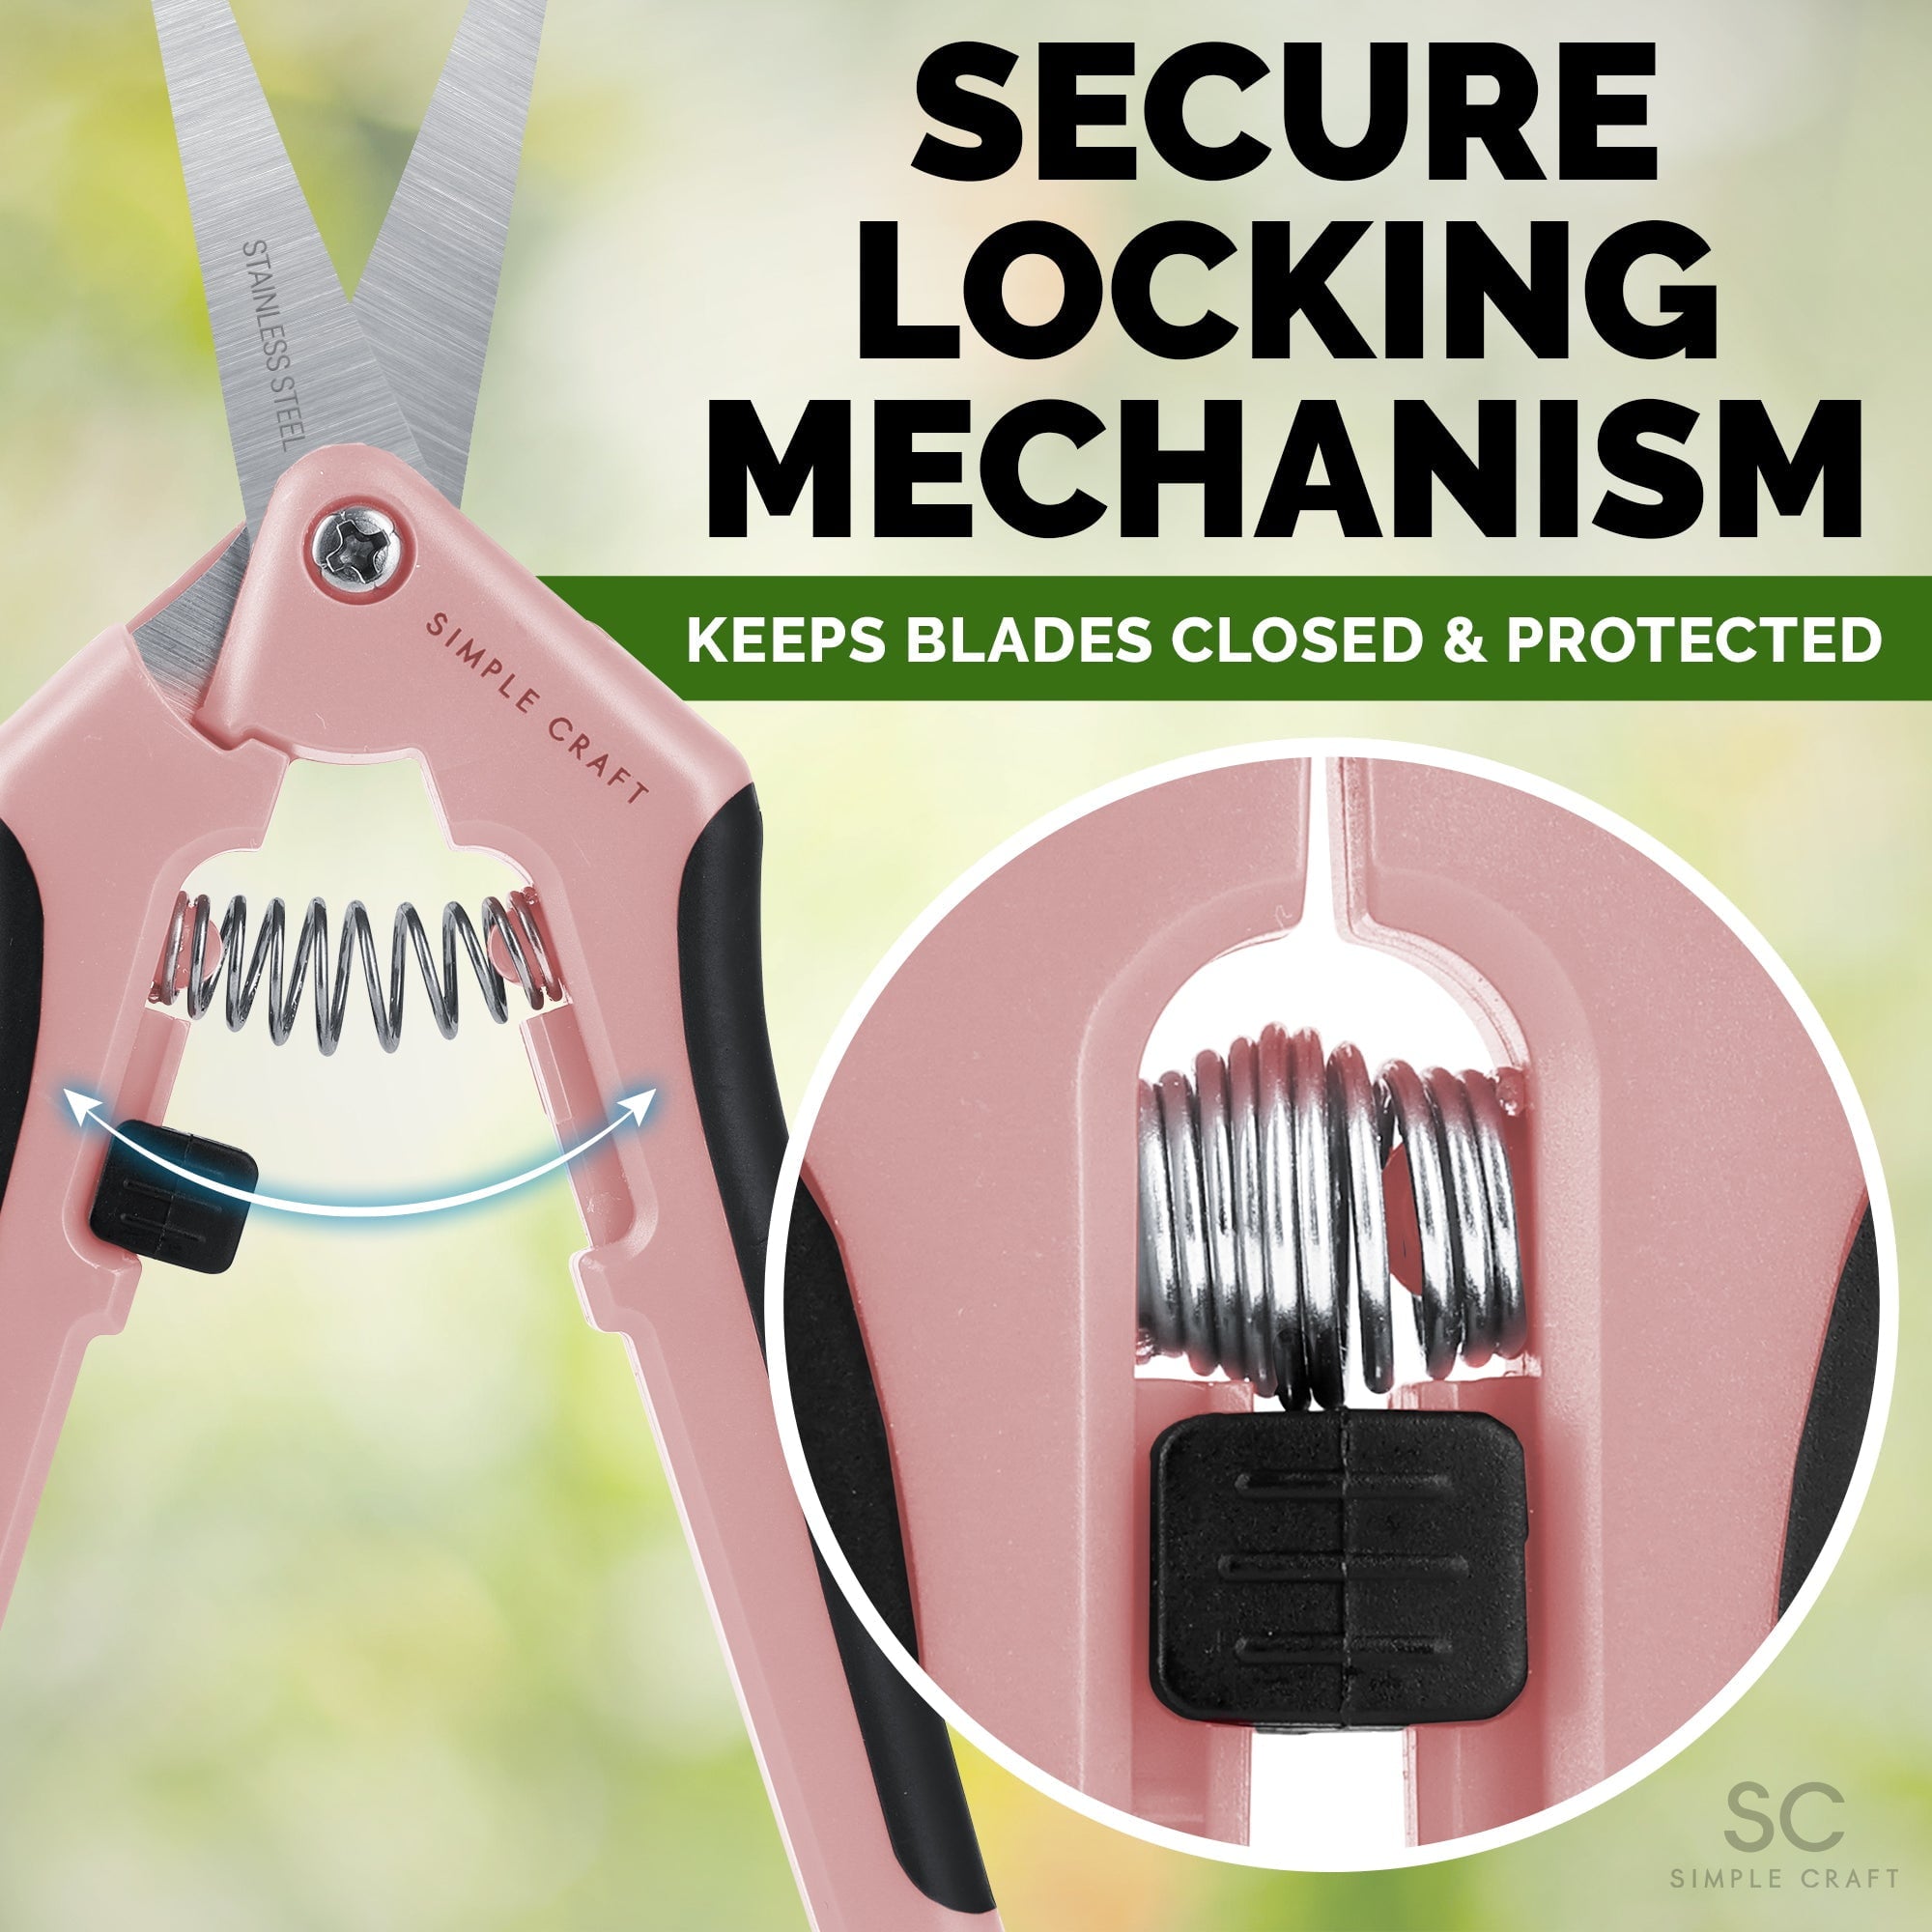 Simple Craft Stainless Steel Coated Pruning Shears - Pink